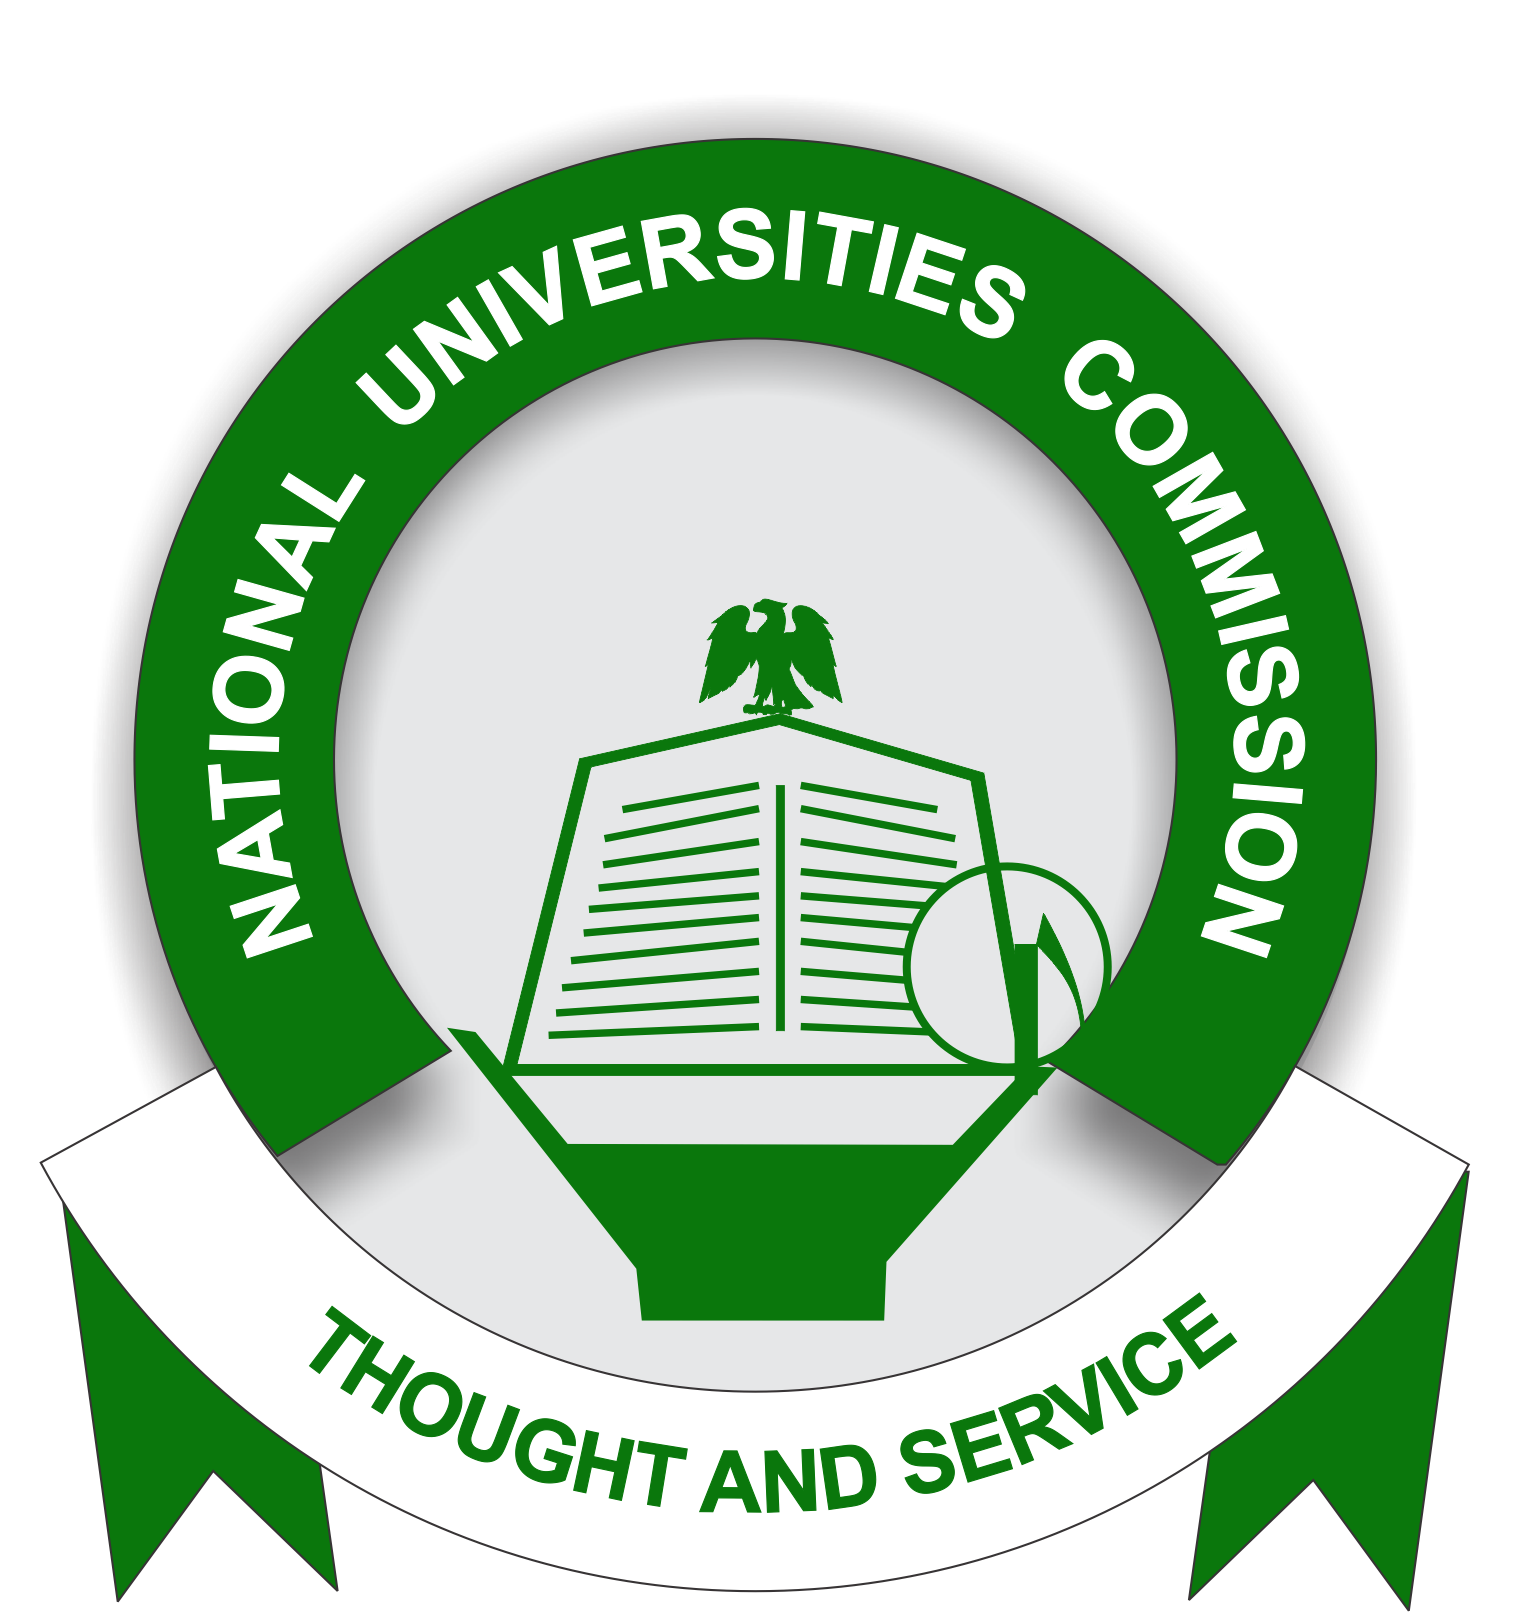 Ogbomoso University gains momentum with education summit slated for June 